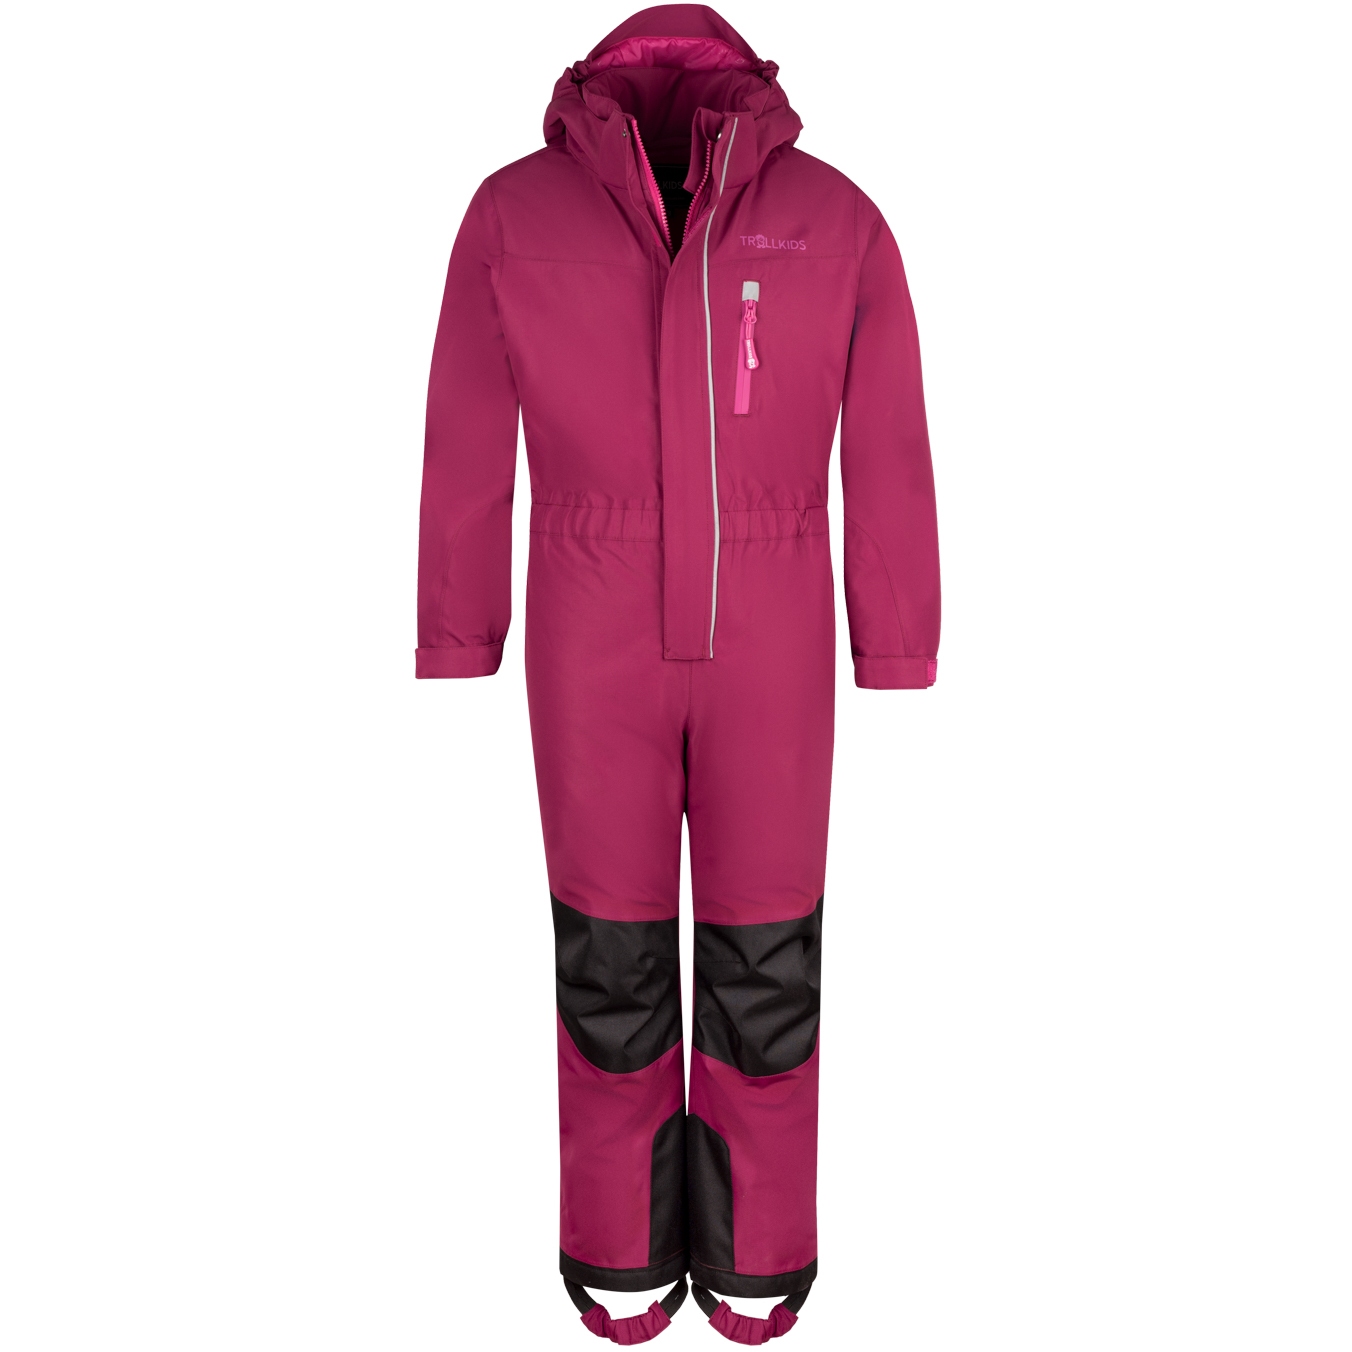 Picture of Trollkids Isfjord Kids Snowsuit - Plum/Fireberry